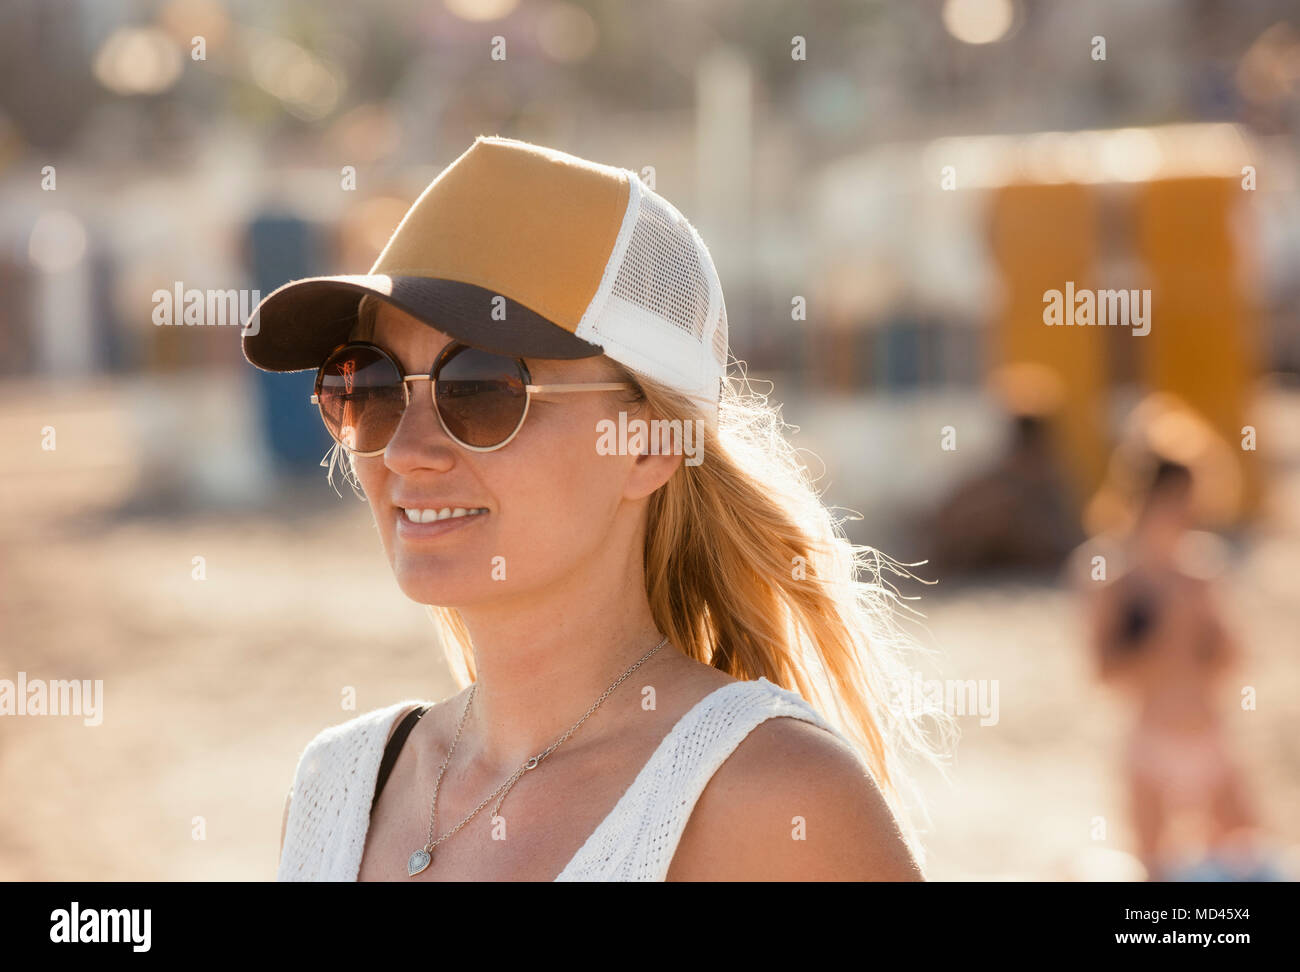 Portrait of woman on beach, wearing sunglasses and cap, Sitges, Catalonia, Spain Stock Photo